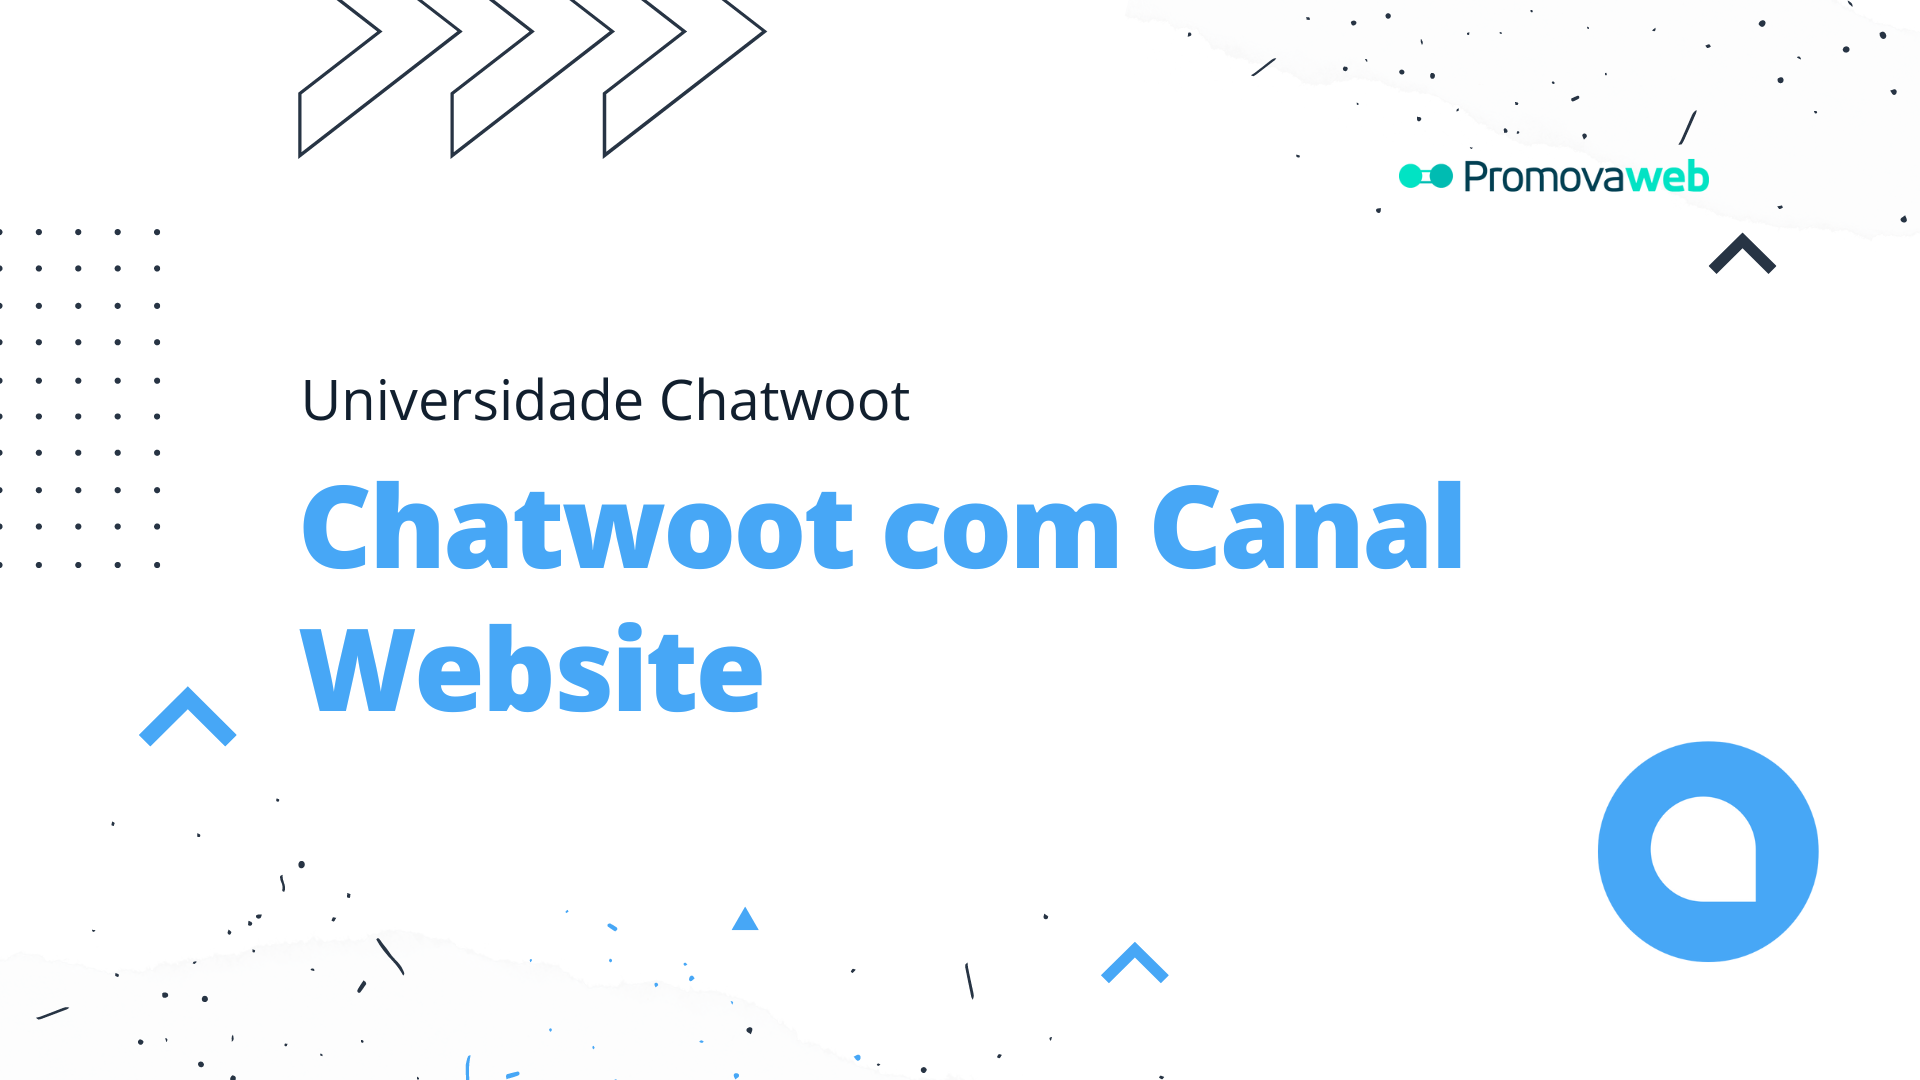 Chatwoot com Canal Website